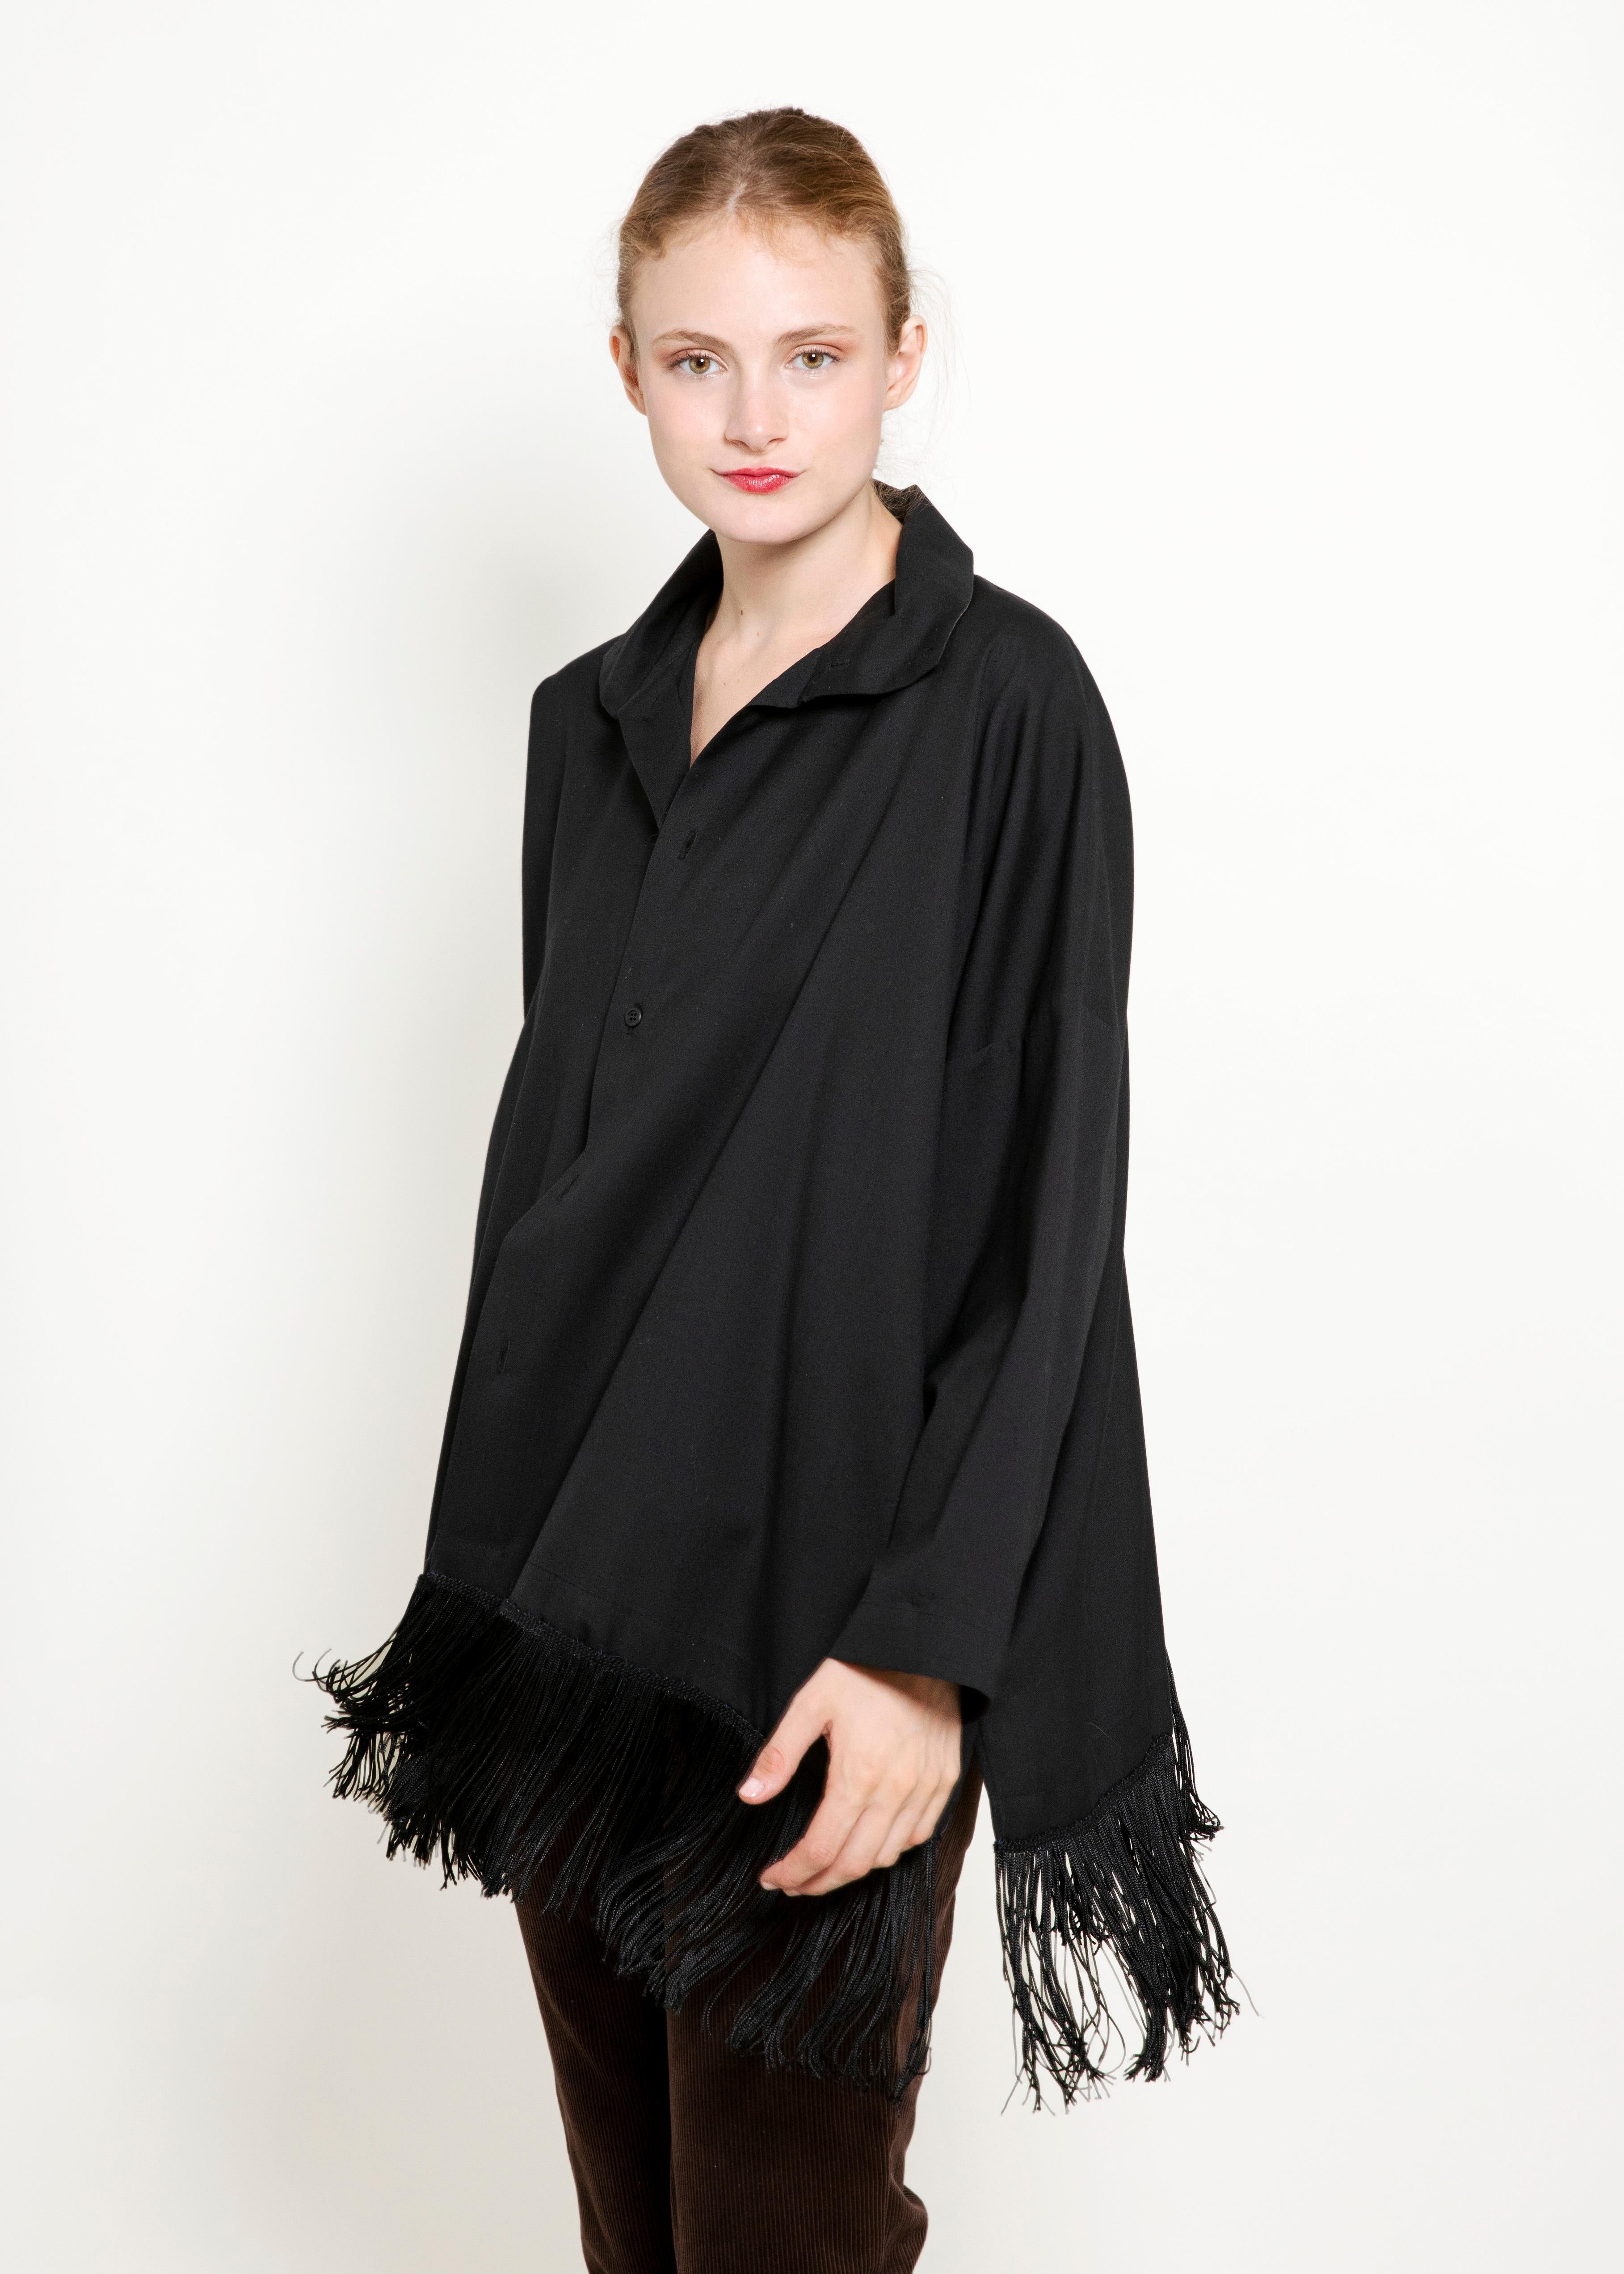 Experience fearless fashion with the eskandar Black Fringe Top. Made with luxurious cashmere, this oversized top features long sleeves and bold fringe details. Take on any challenge with this statement piece.

 

Condition: Excellent Vintage